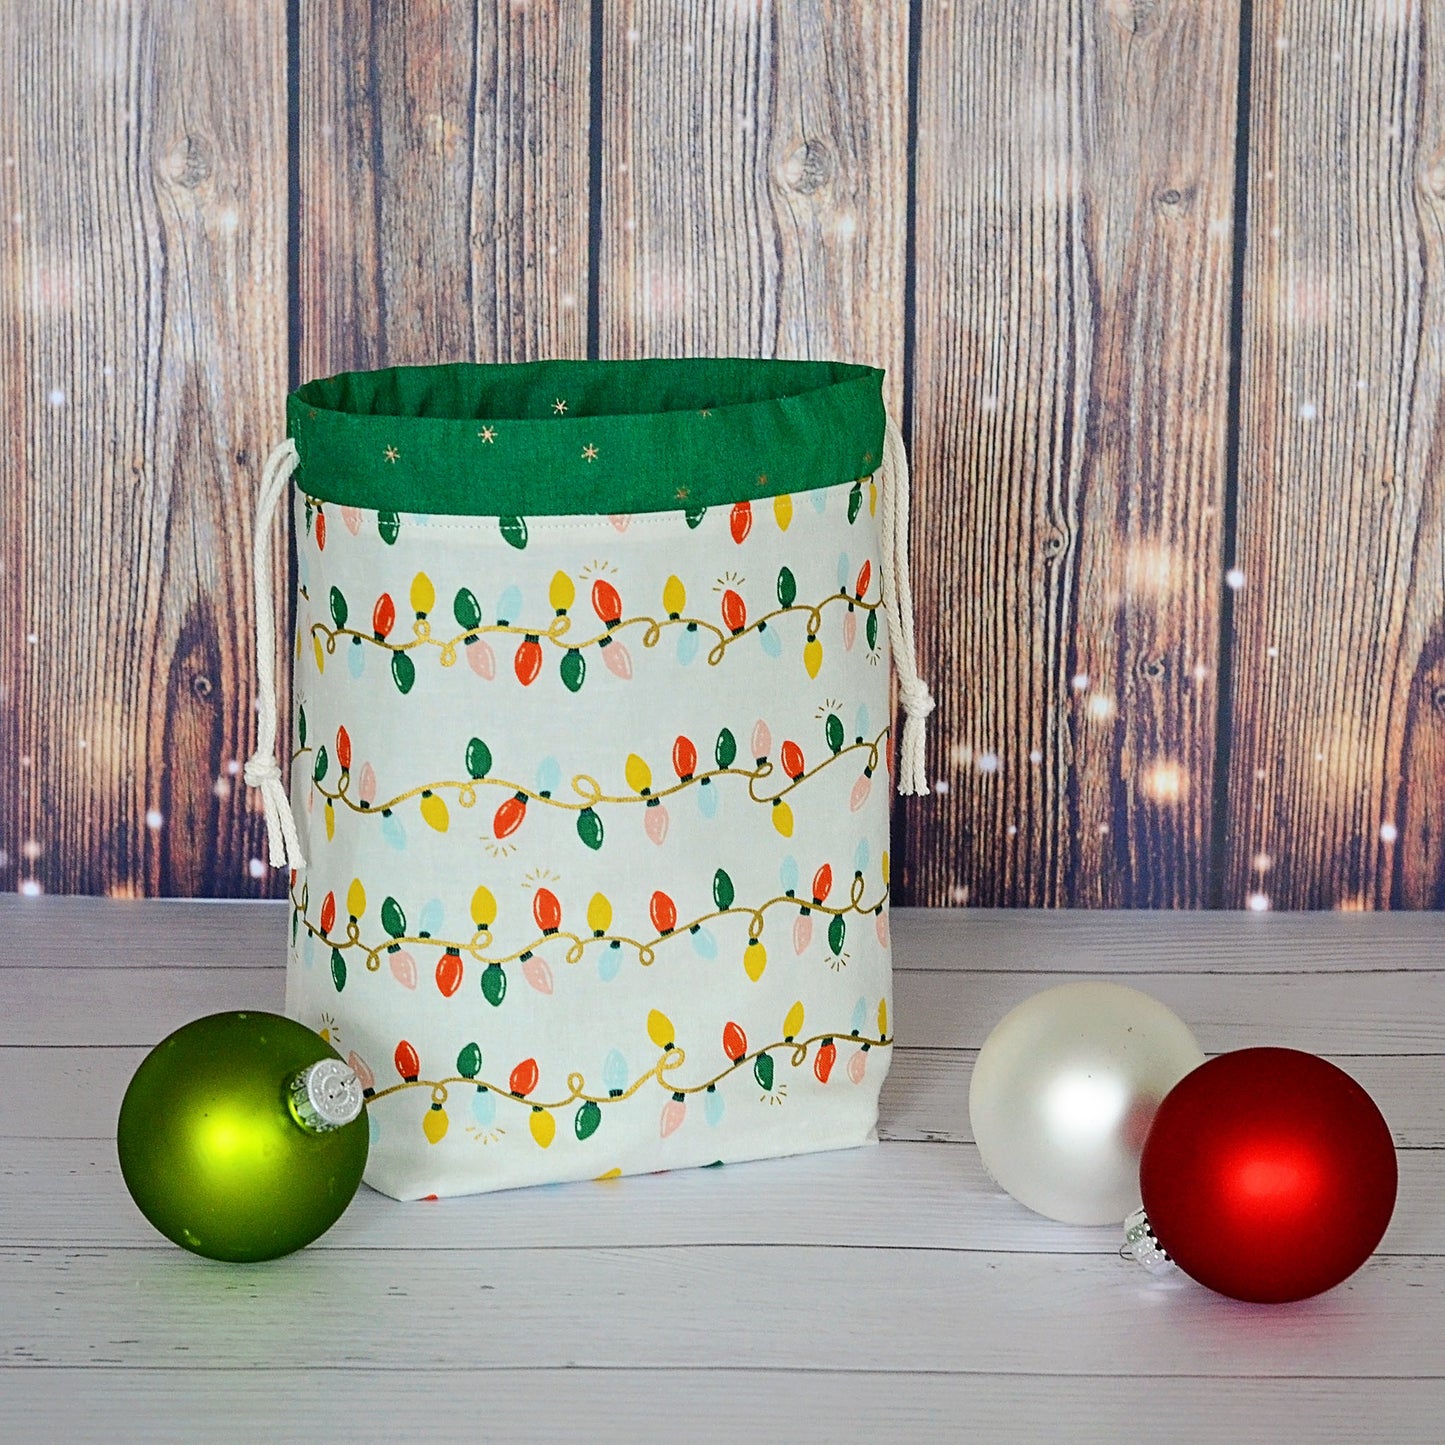 Christmas Lights gift bag or knitting bag, lined with a pretty green lining.  Made by Yellow Petal Handmade in Nova Scotia, Canada.